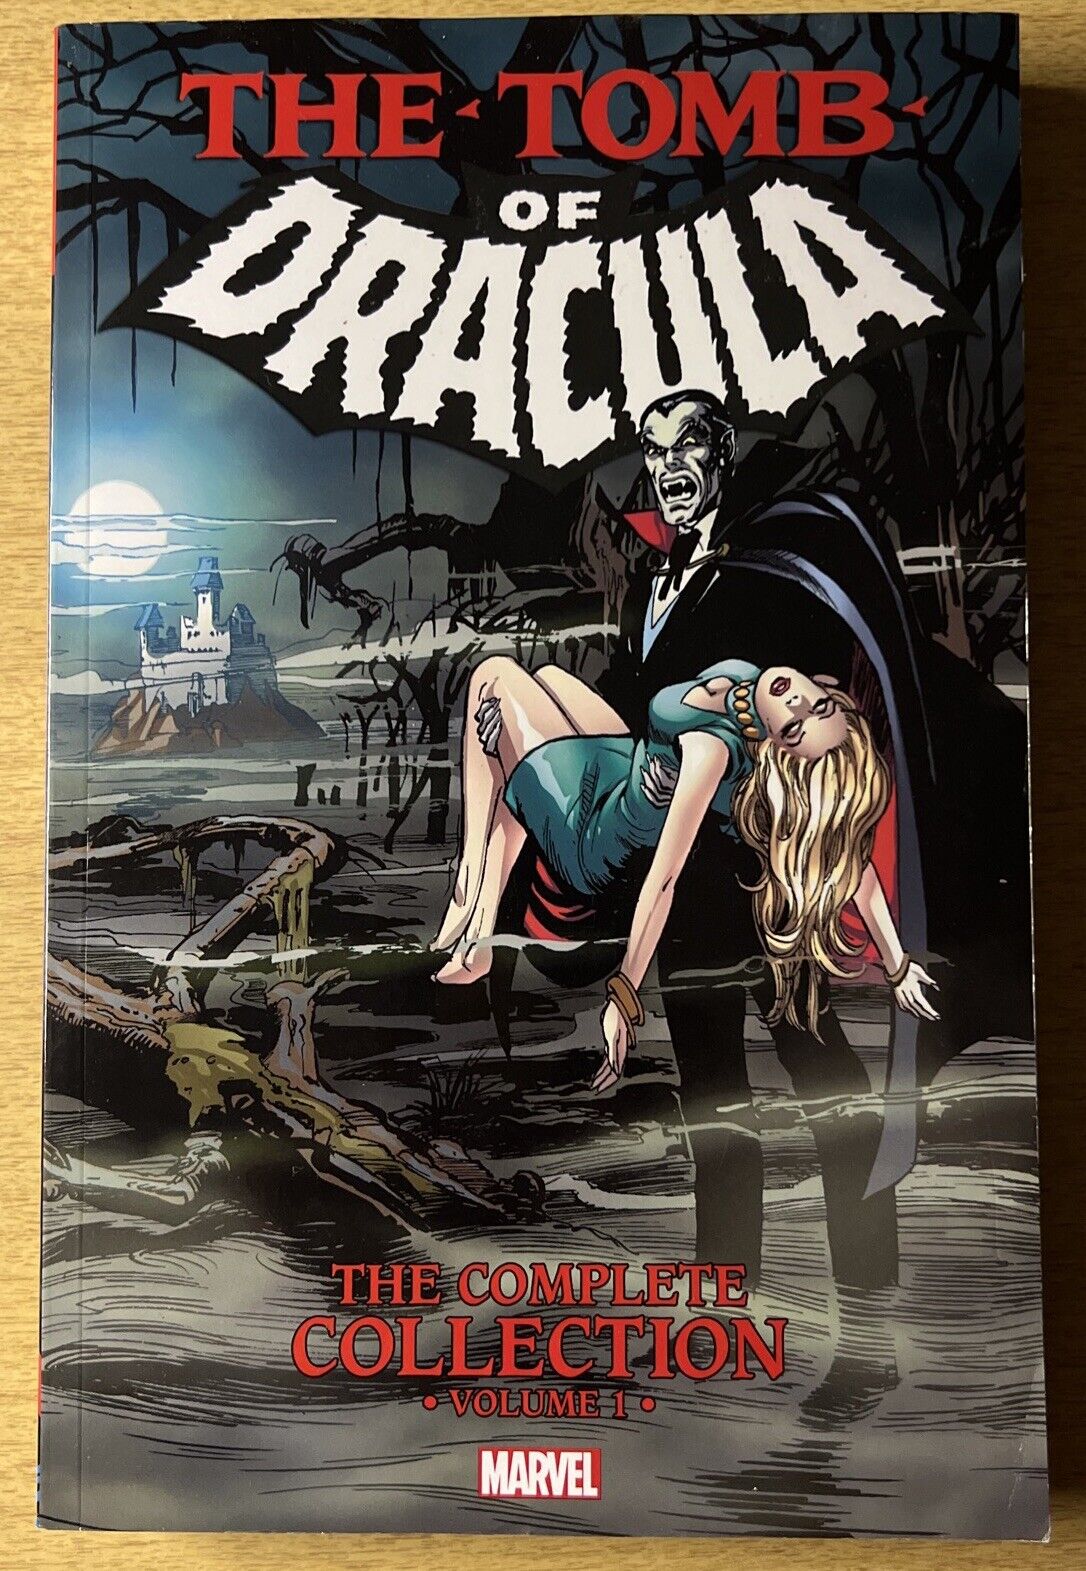 MARVEL: Dracula - Tomb of Dracula - The Complete Collection Vol. 1 - Brand New